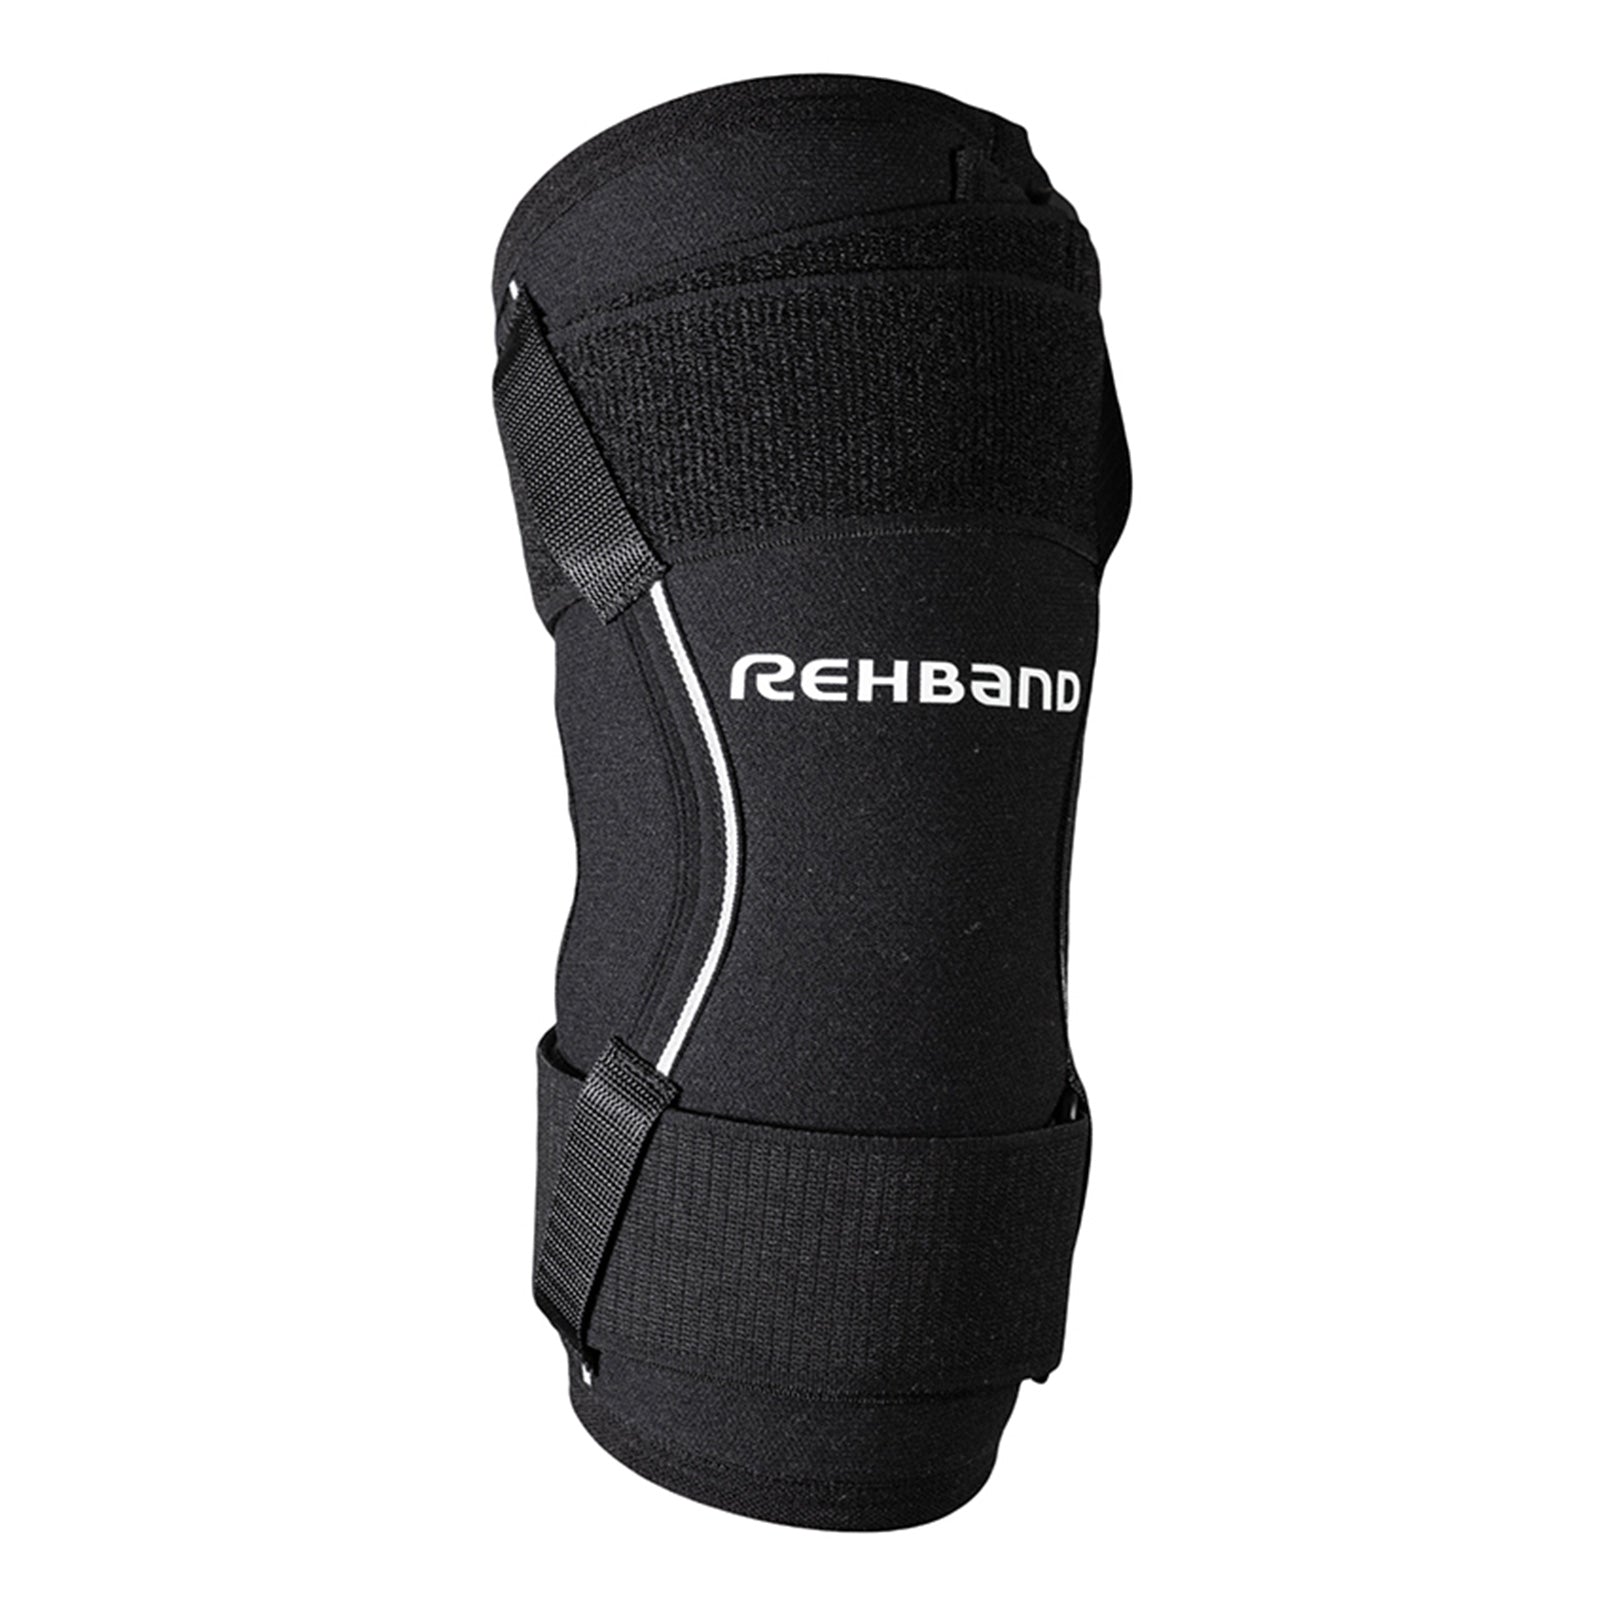 A black elbow support with two adjusters and a Rehband lettering in the center